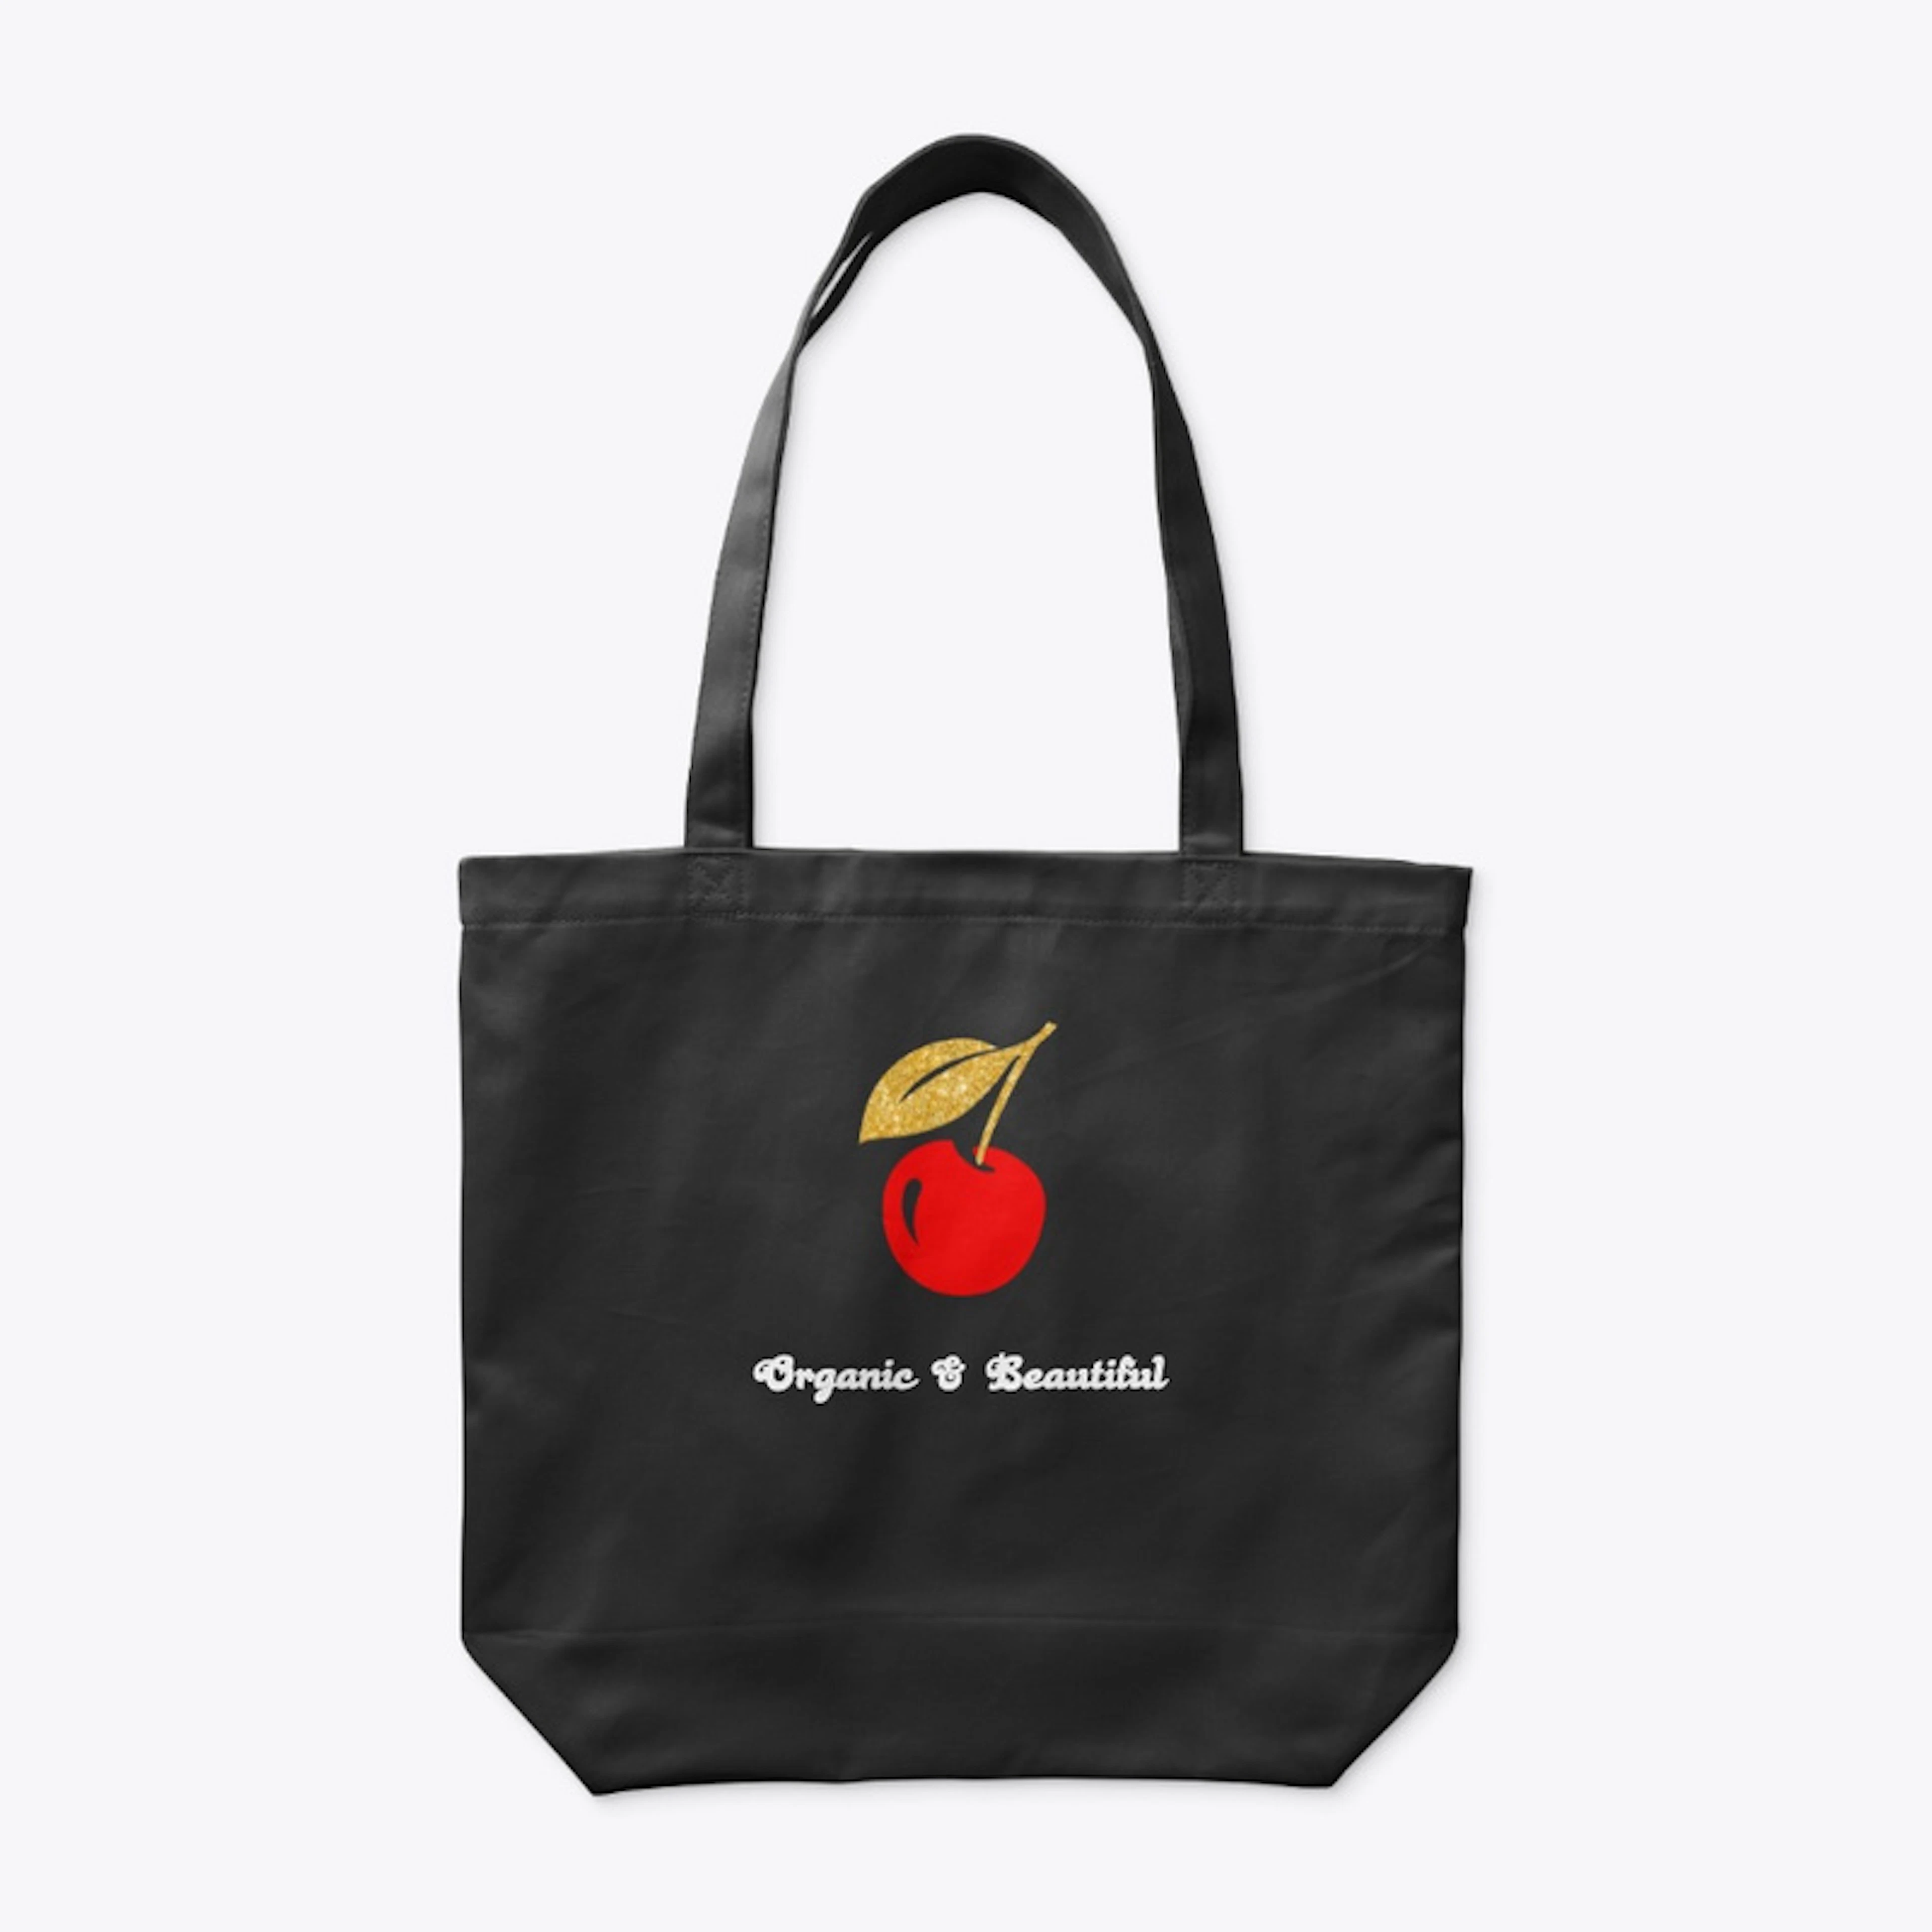 The Basic Tote